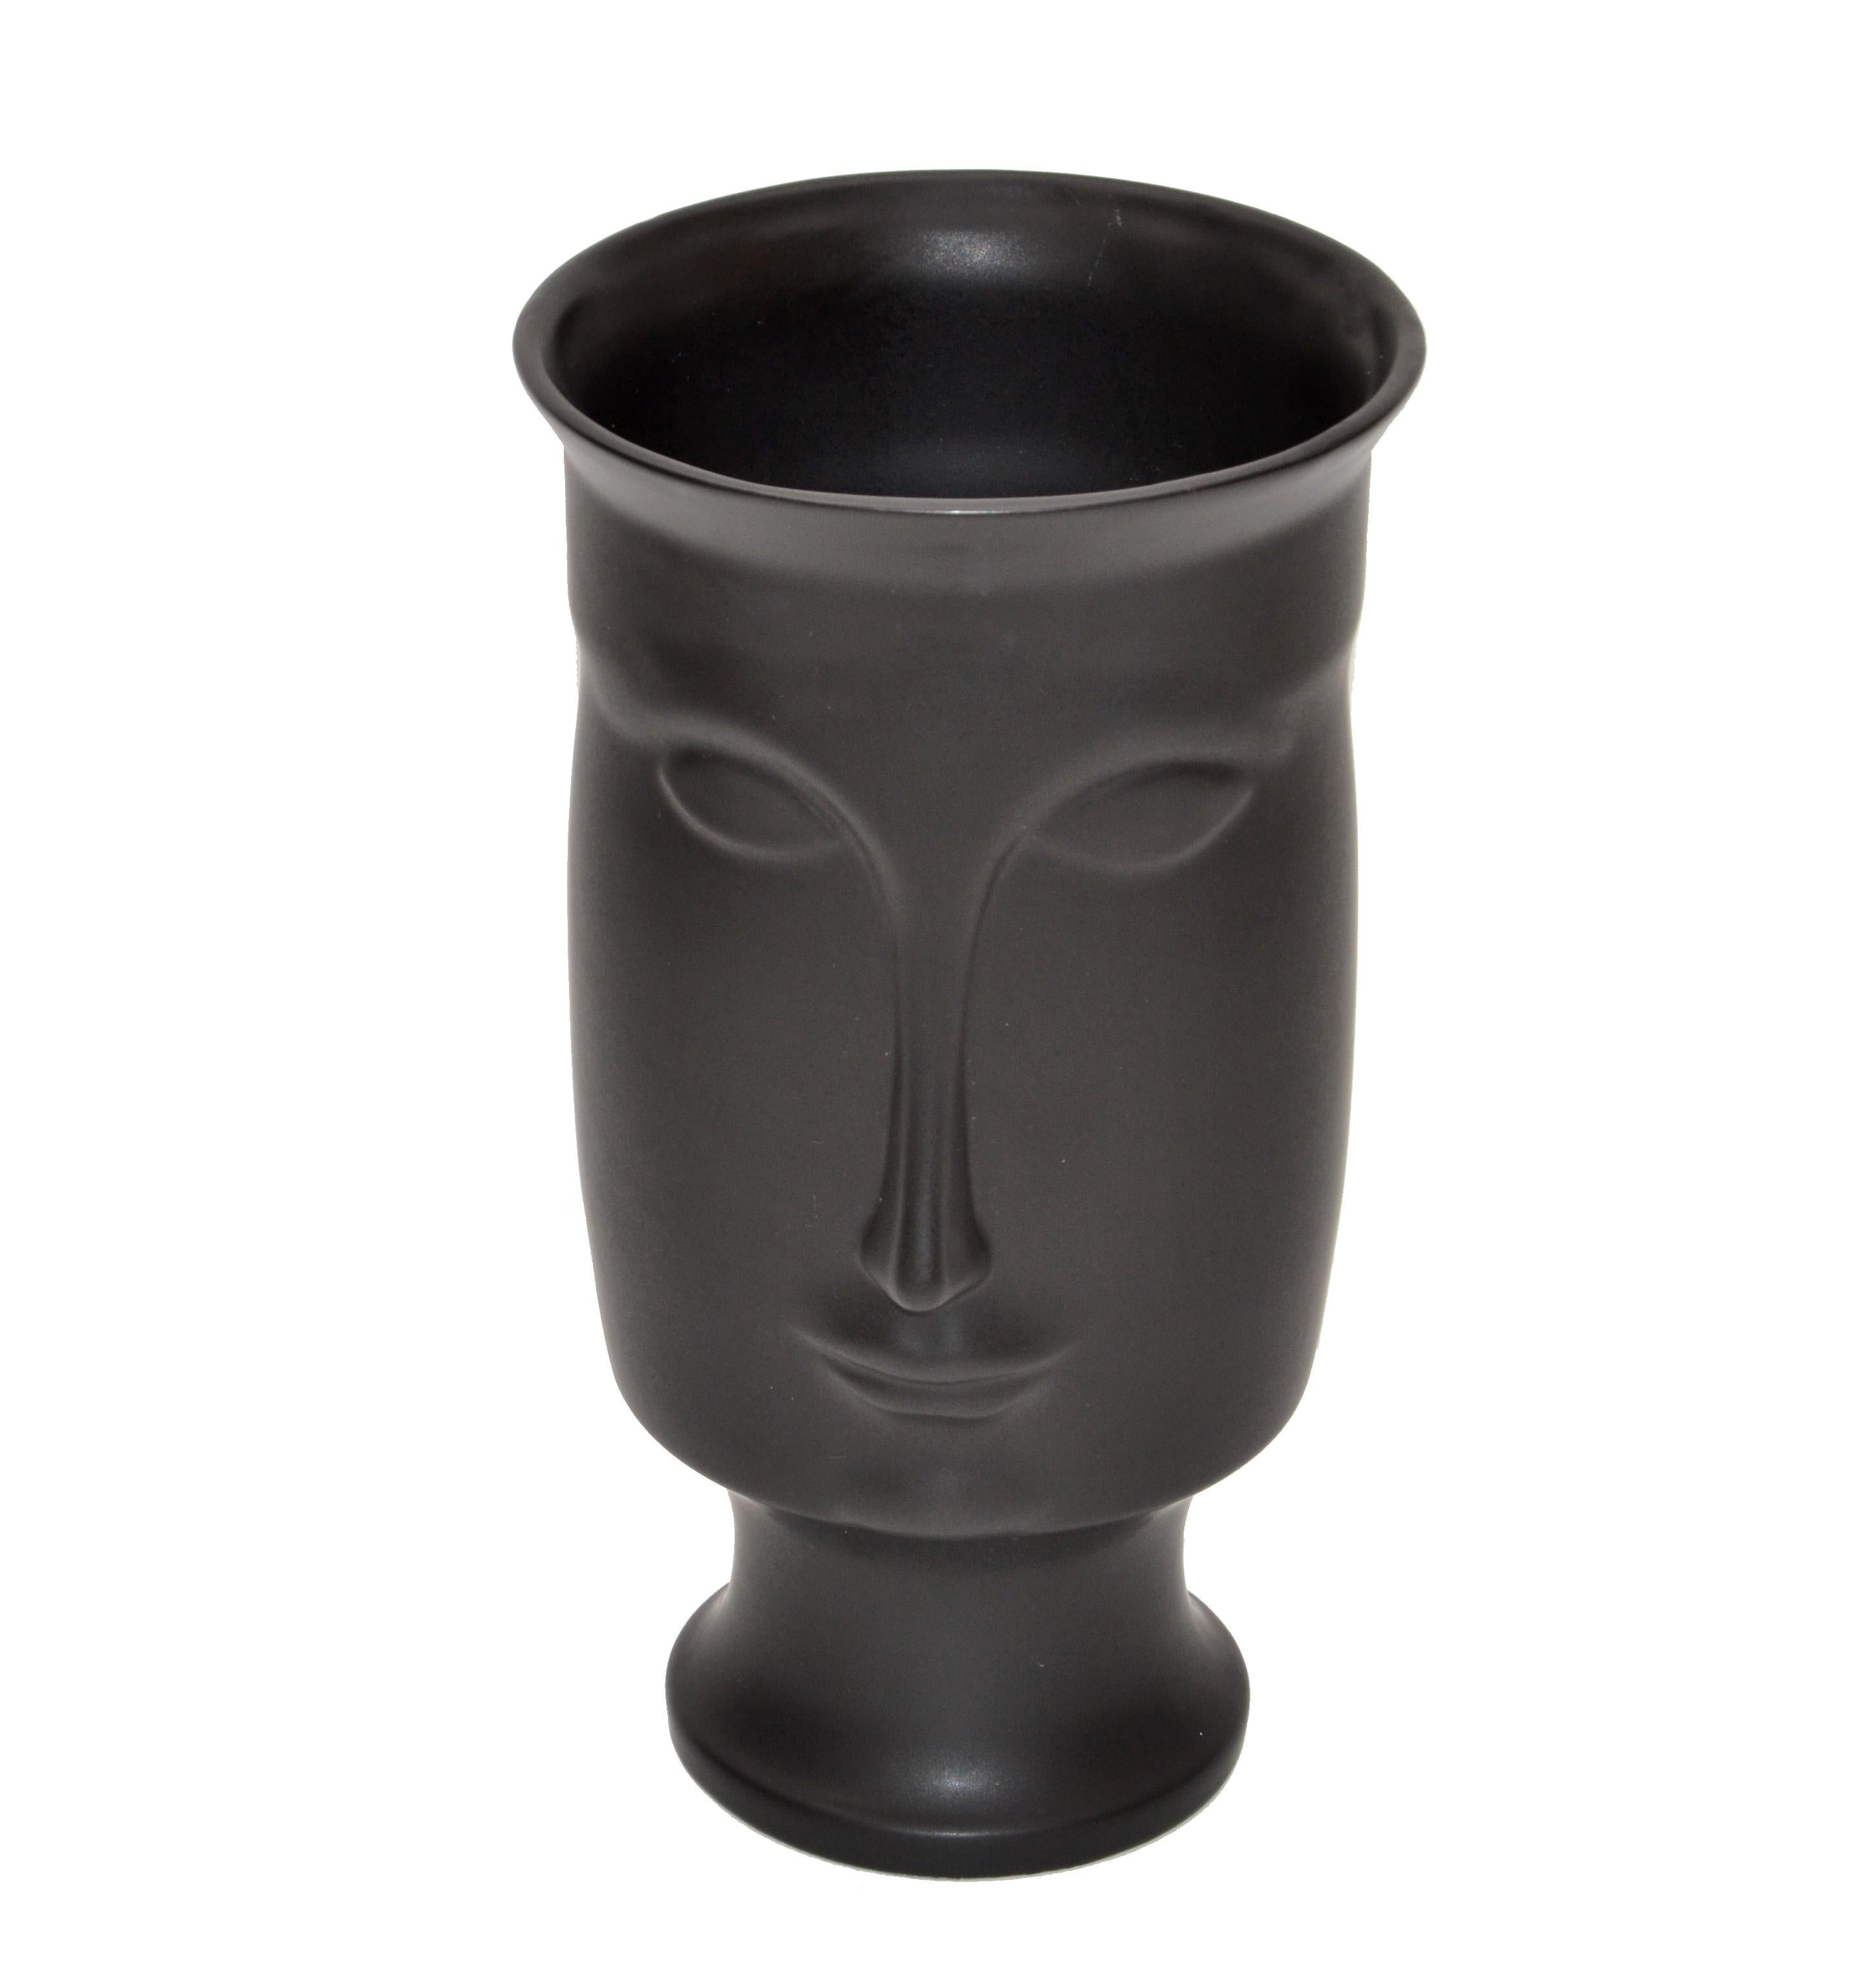 Mid-Century Modern black ceramic face or head vase.
Great looking from all sides.
Studio piece with no markings.